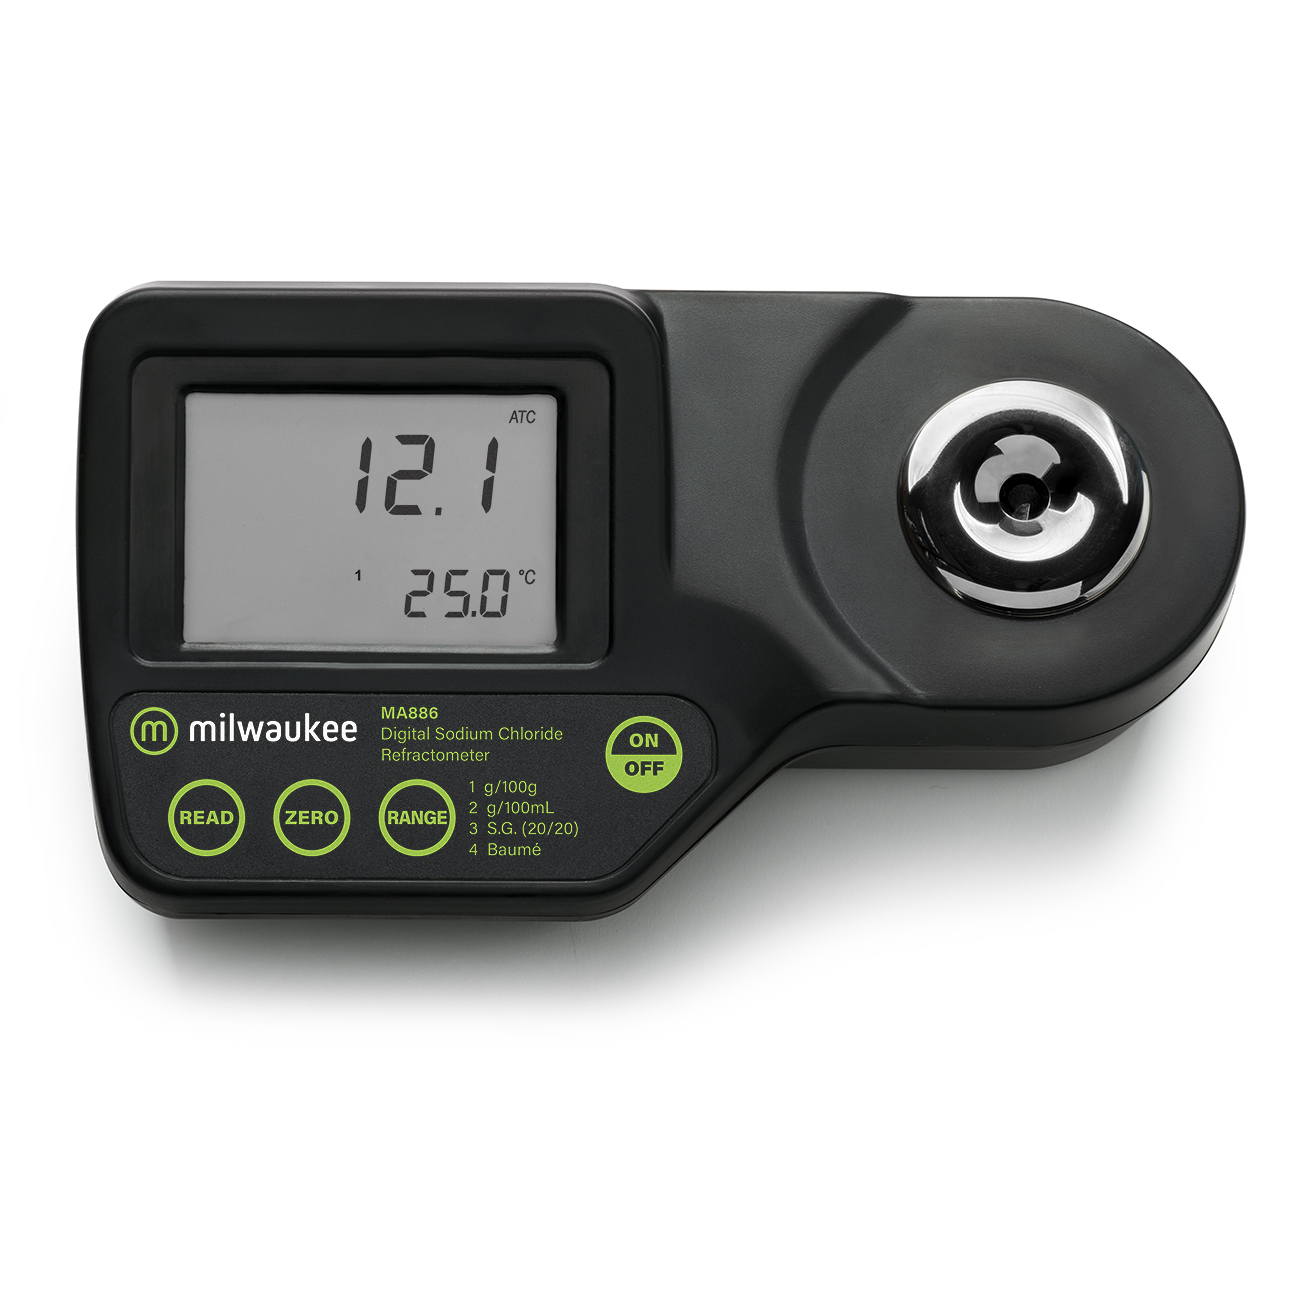 Milwaukee MA886 Digital refractometer for the determination of sodium chloride in food